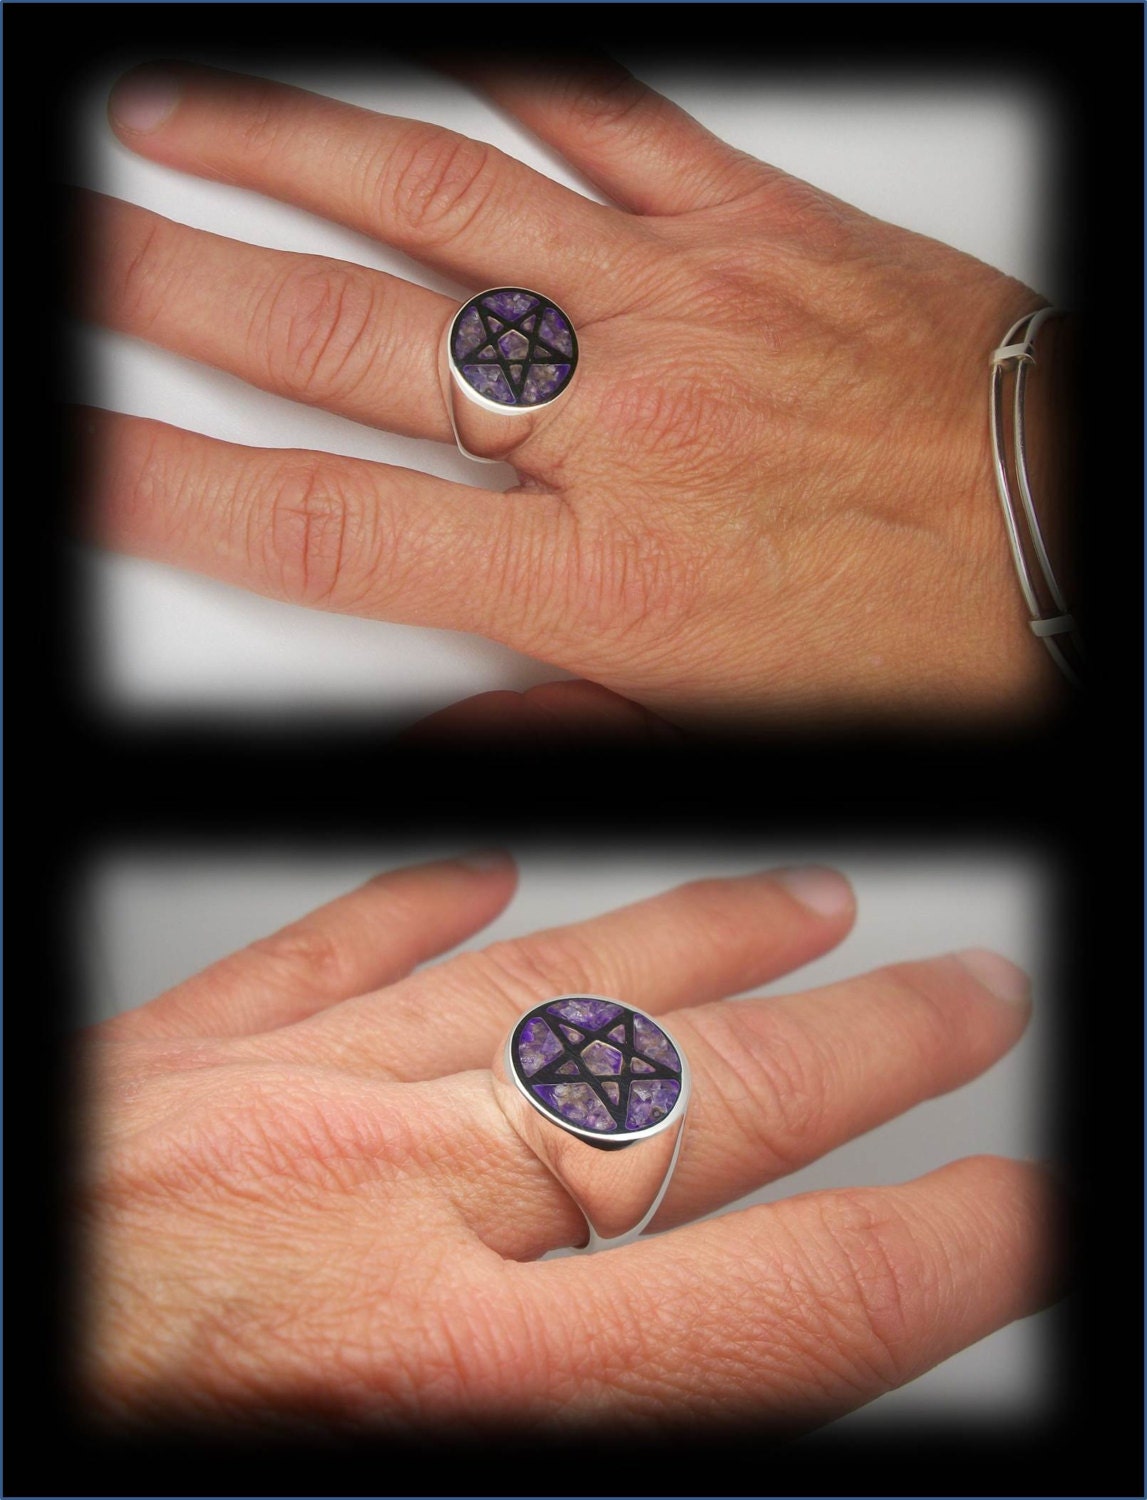 Pentacle ring - Sterling Silver Pentacle ring with crushed Amethyst - All Sizes